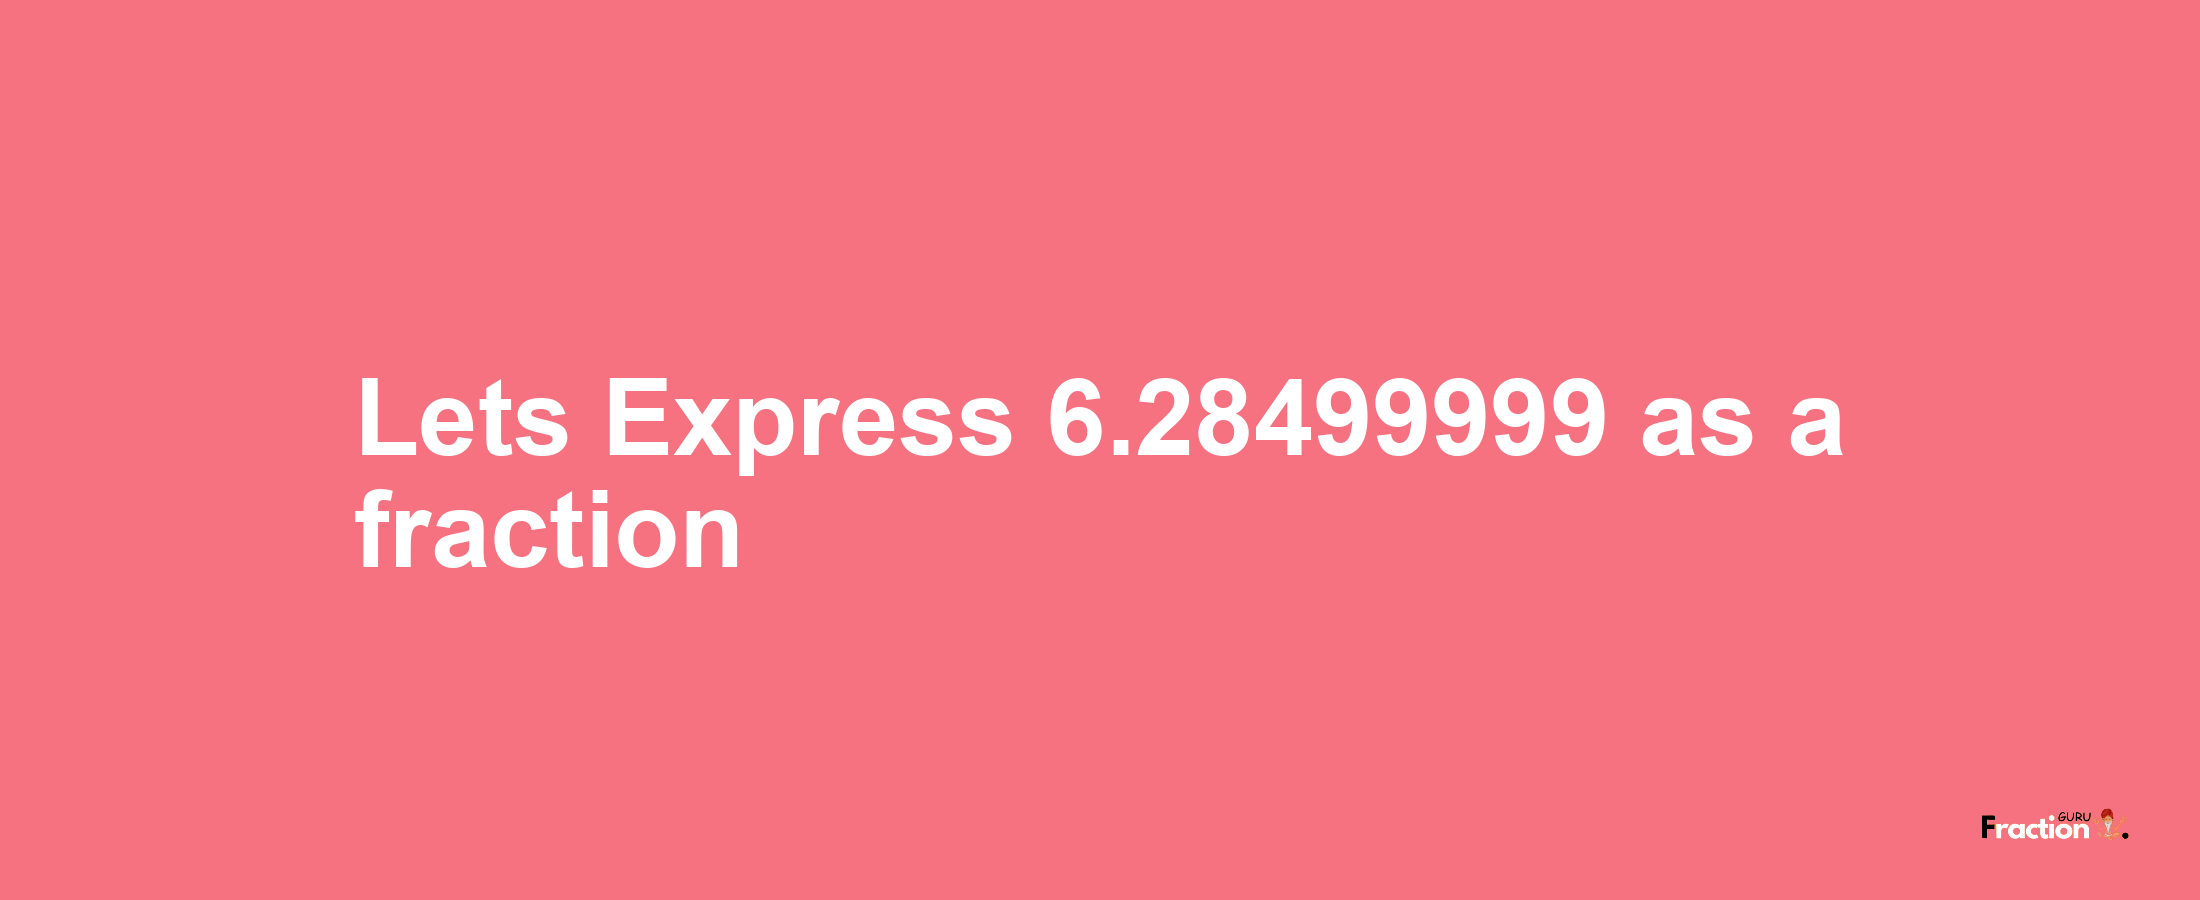 Lets Express 6.28499999 as afraction